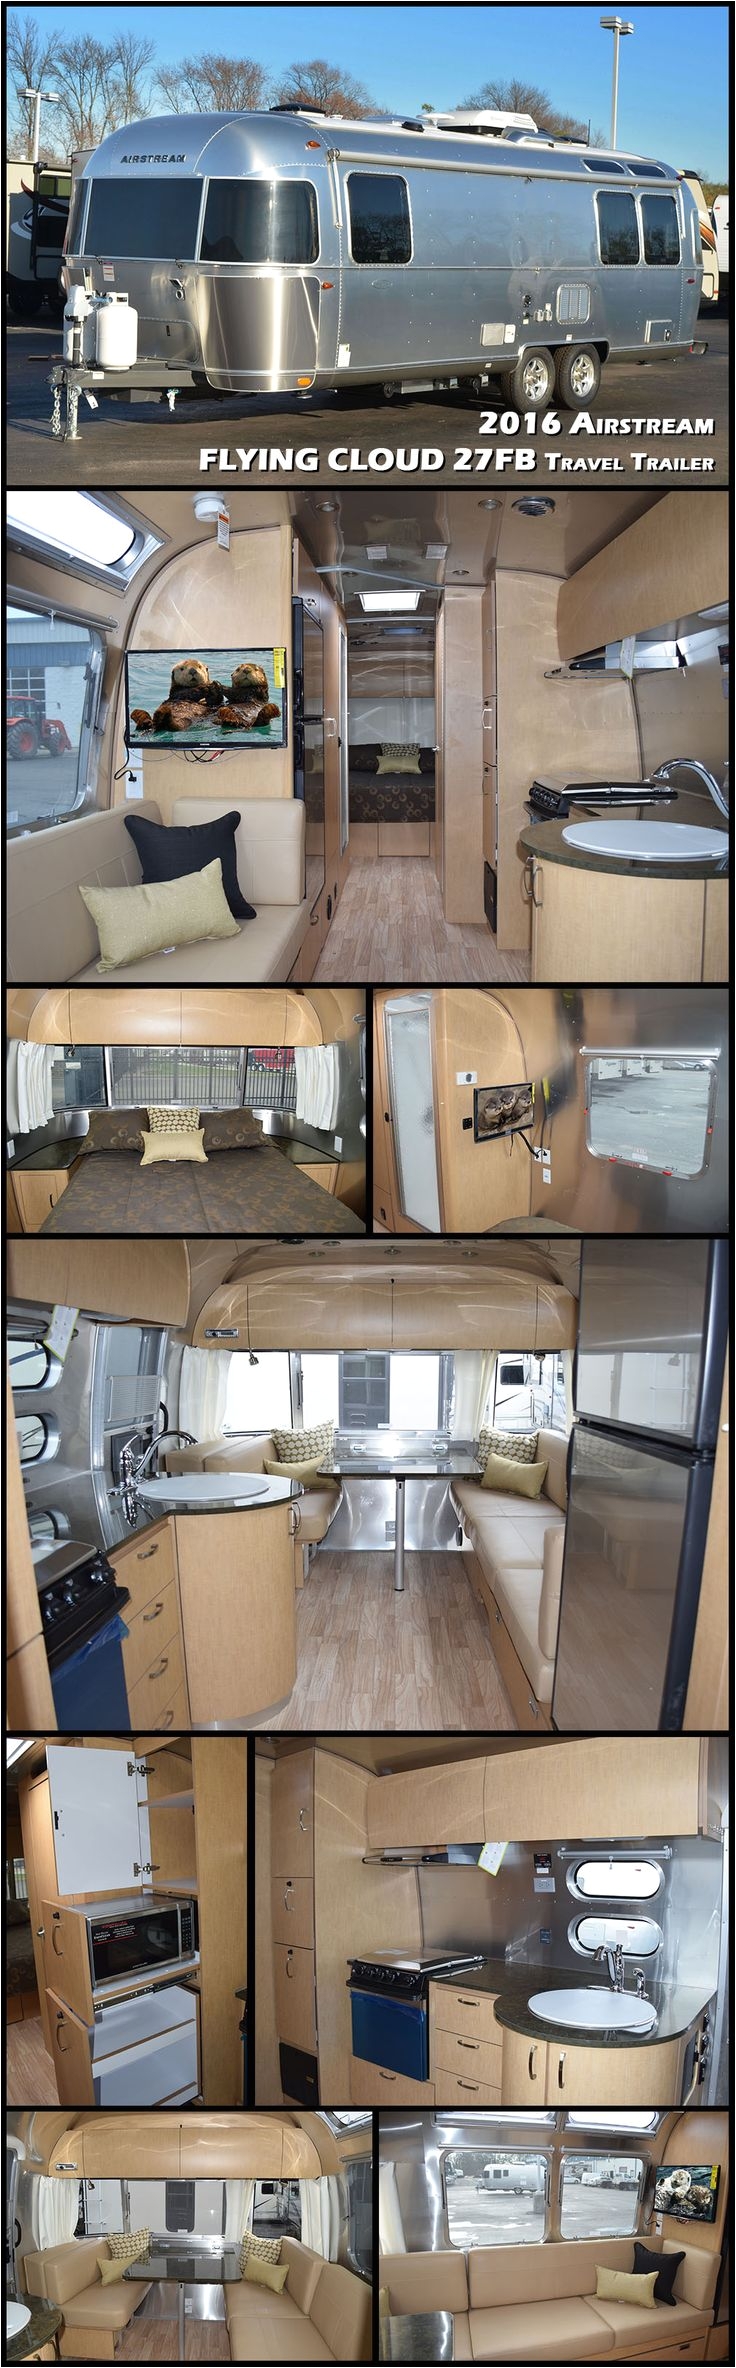 this 2016 27fb flying cloud travel trailer by airstream has a front queen bedroom with a